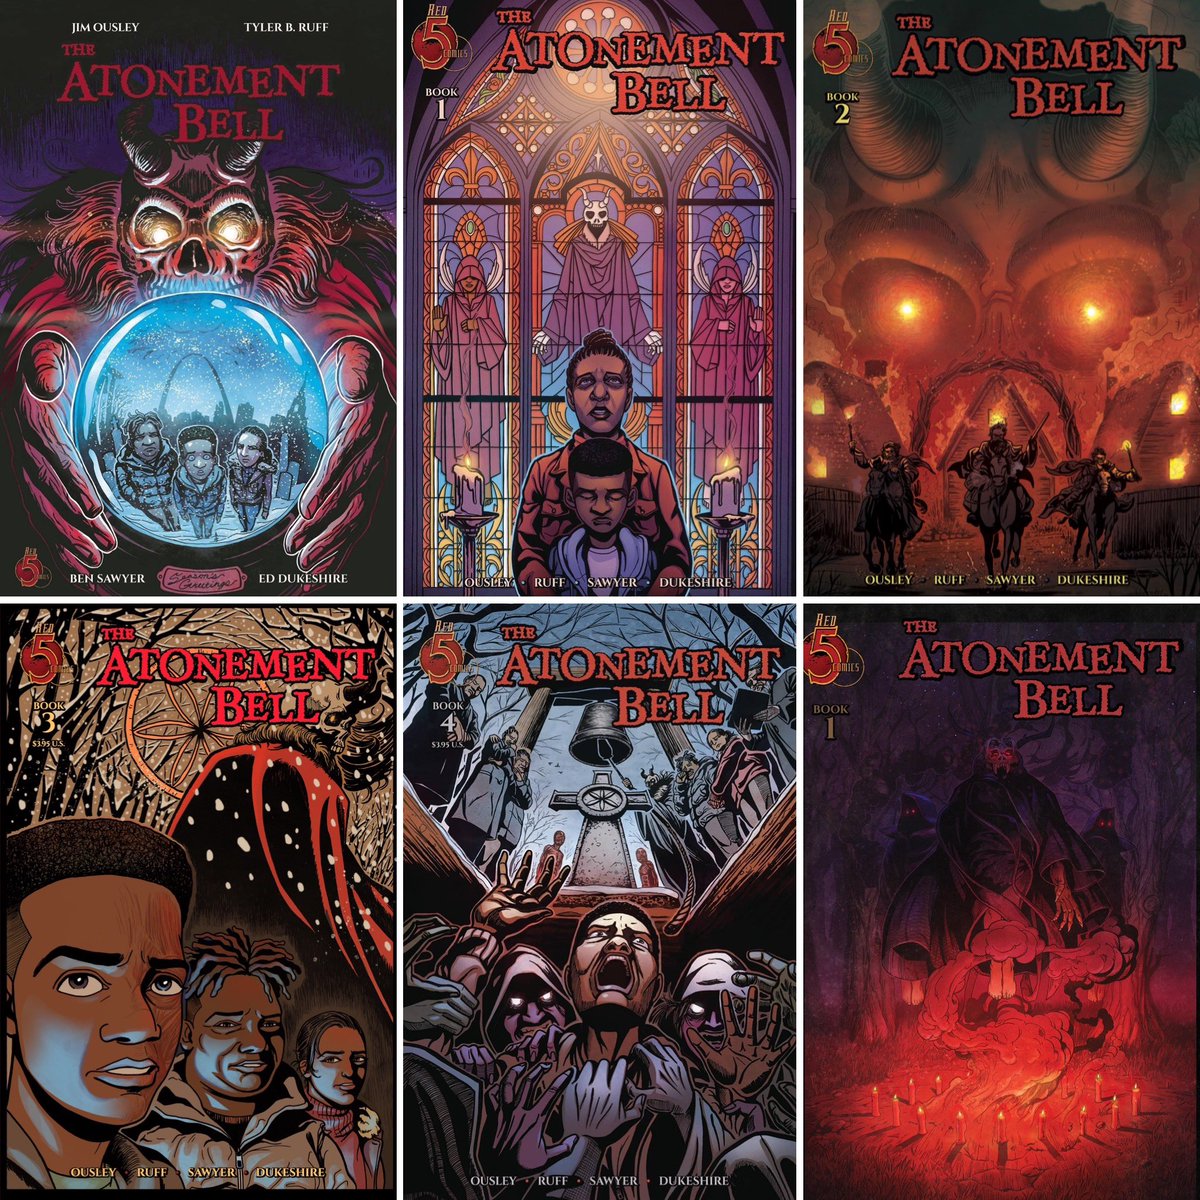 If you are a comic industry professional, retailer, employee working w/a retailer, creator, or a librarian, please consider The Atonement Bell in the 2023 #EisnerAwards ballot in the Best New Series category. Cutoff is June 9th!

#readmorecomics @indiecomicszone @PromoteHorror